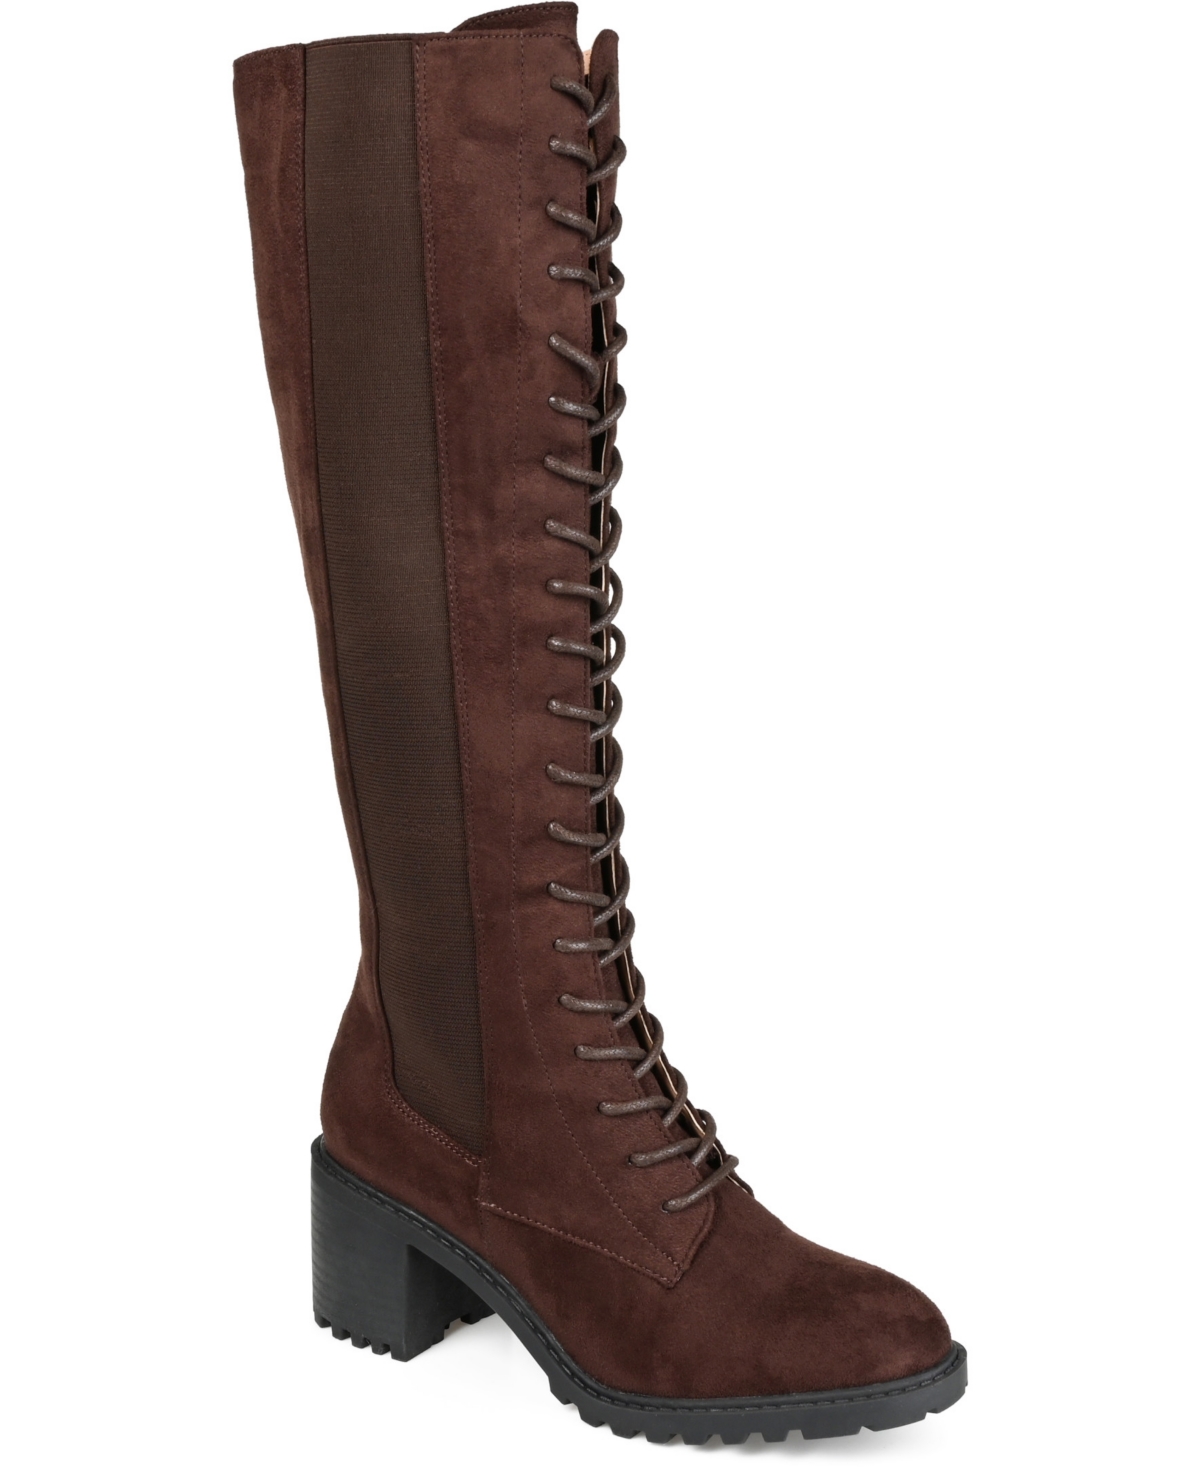 Women's Jenicca Lace Up Boots - Taupe